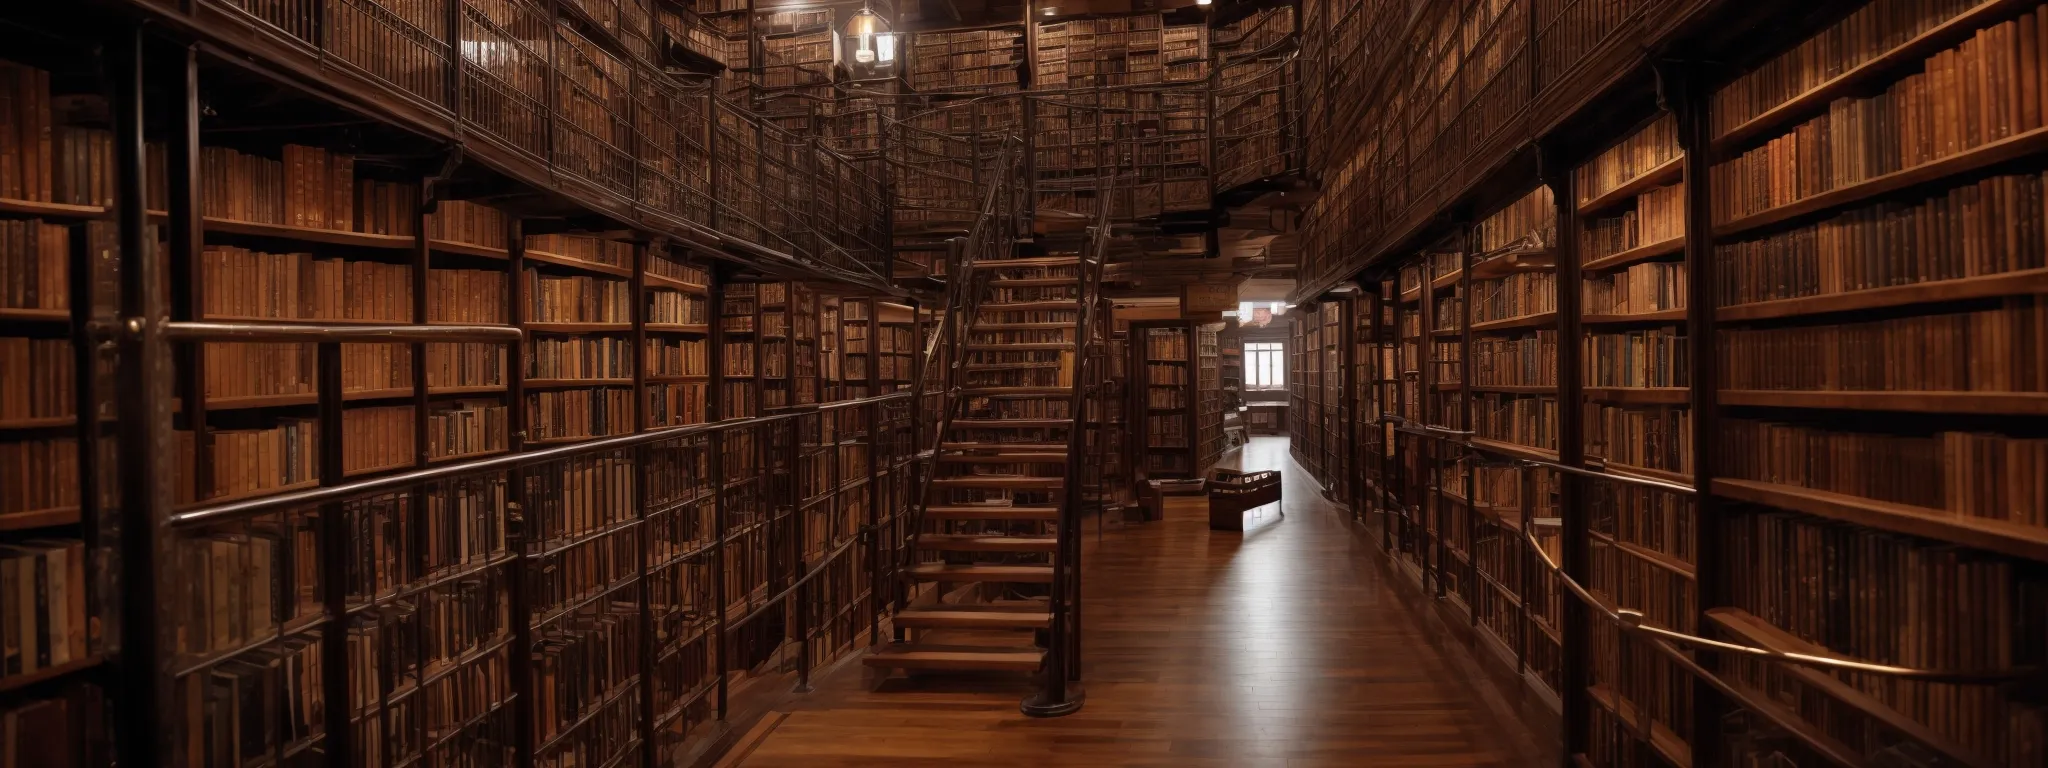 a vast library with an intricate network of ladders and bridges connecting countless bookshelves, symbolizing structured pathways.